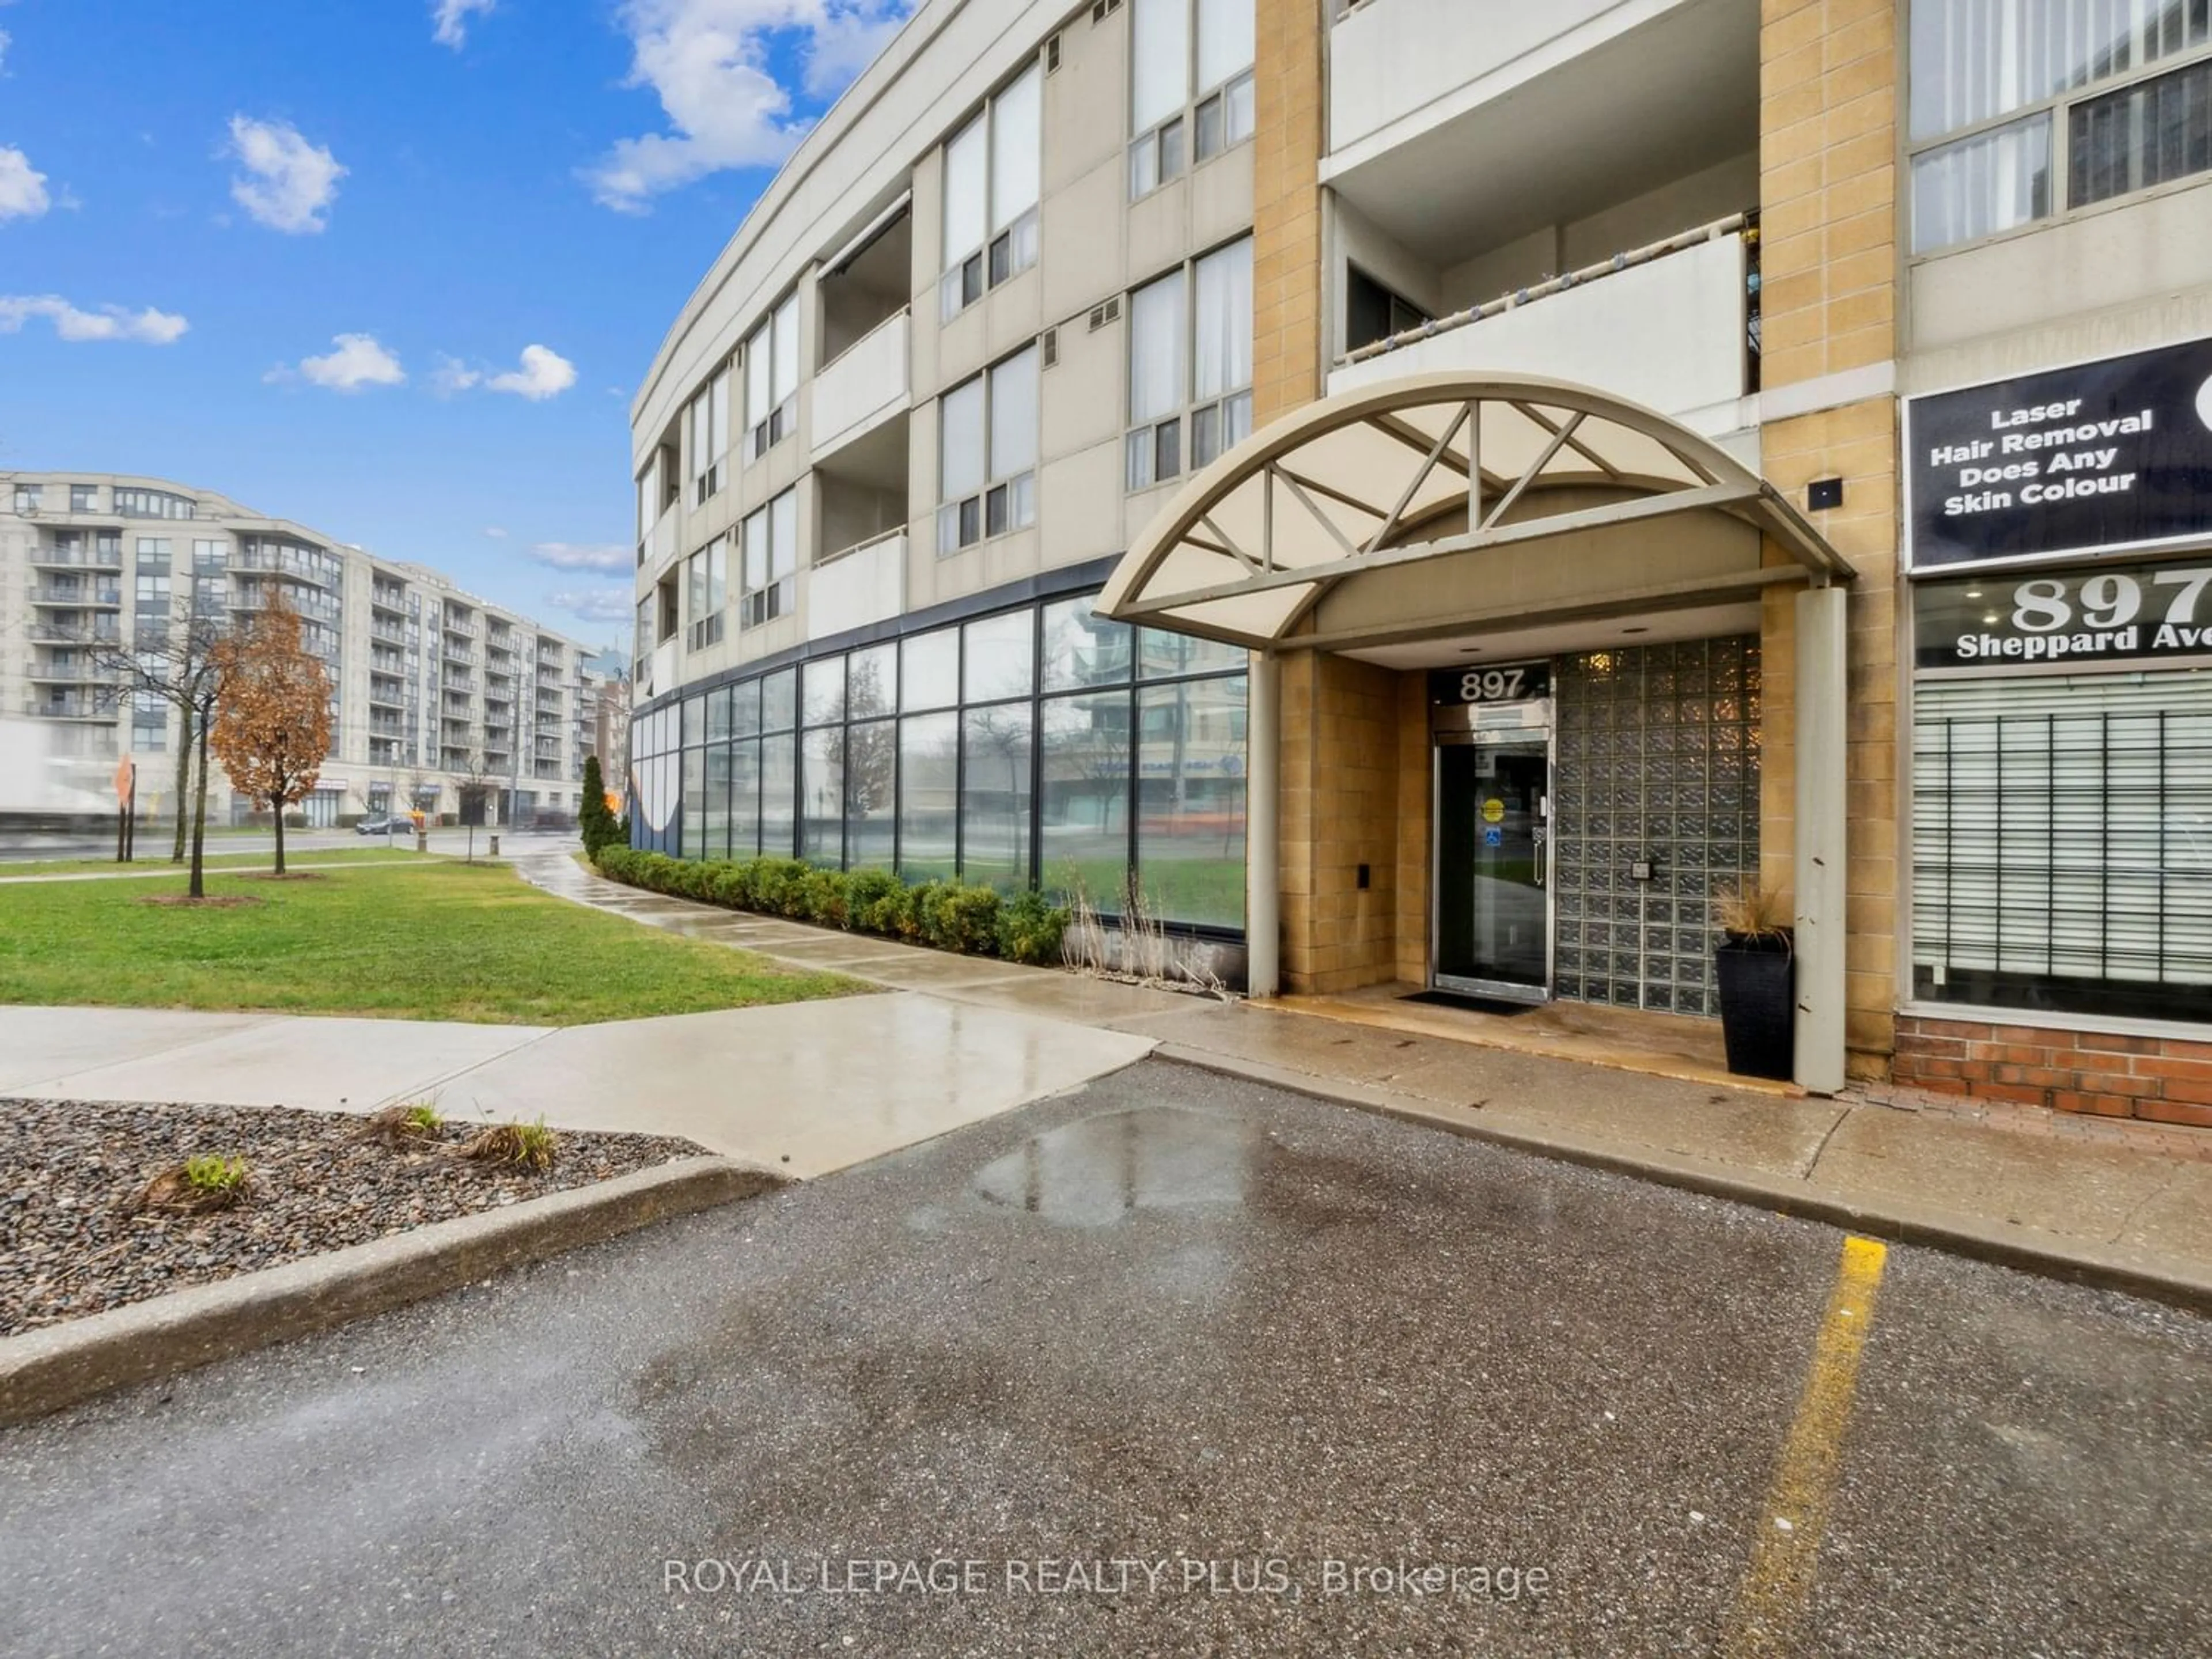 A pic from exterior of the house or condo for 897 Sheppard Ave West Ave #306, Toronto Ontario M3H 2T4